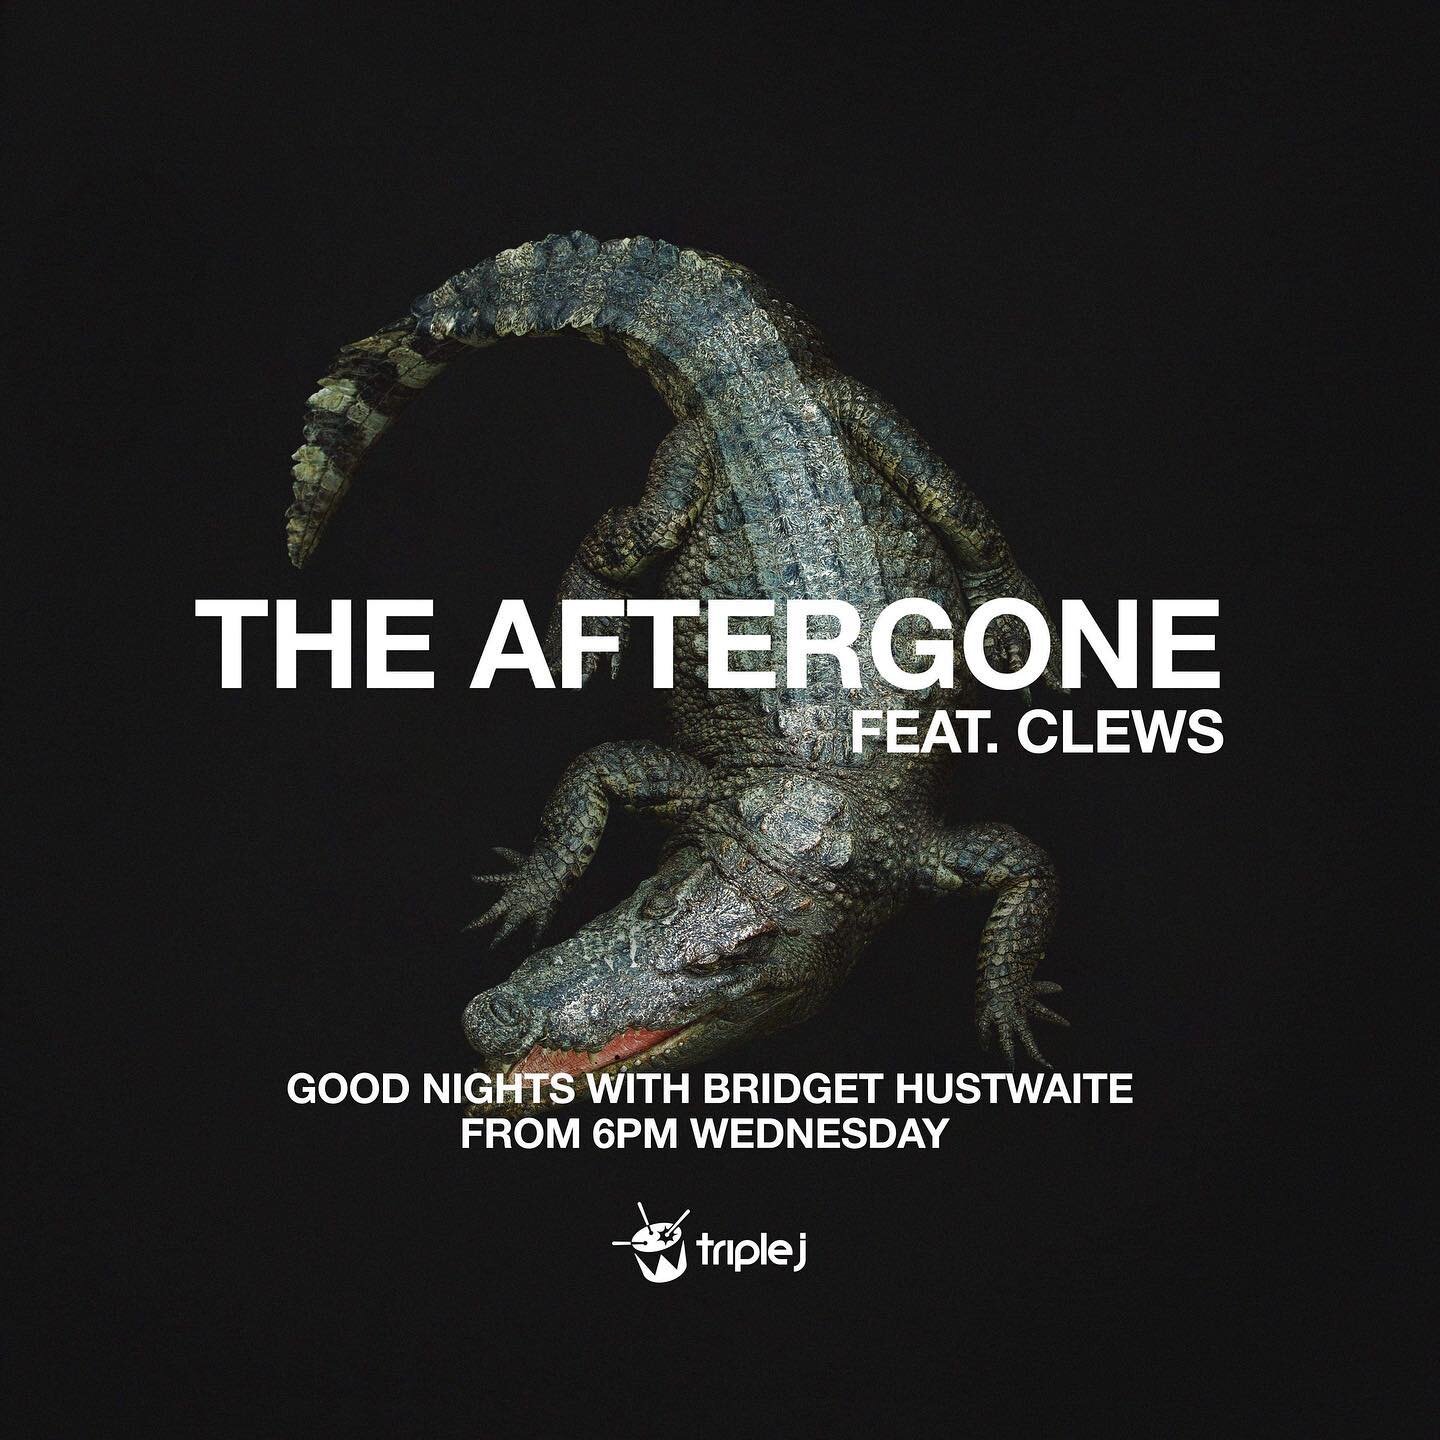 The Aftergone feat @clewsmusic ... premiering this WED on Good Nights w @bridgethustwaite - after 6pm on @triple_j 🐊🐊🐊